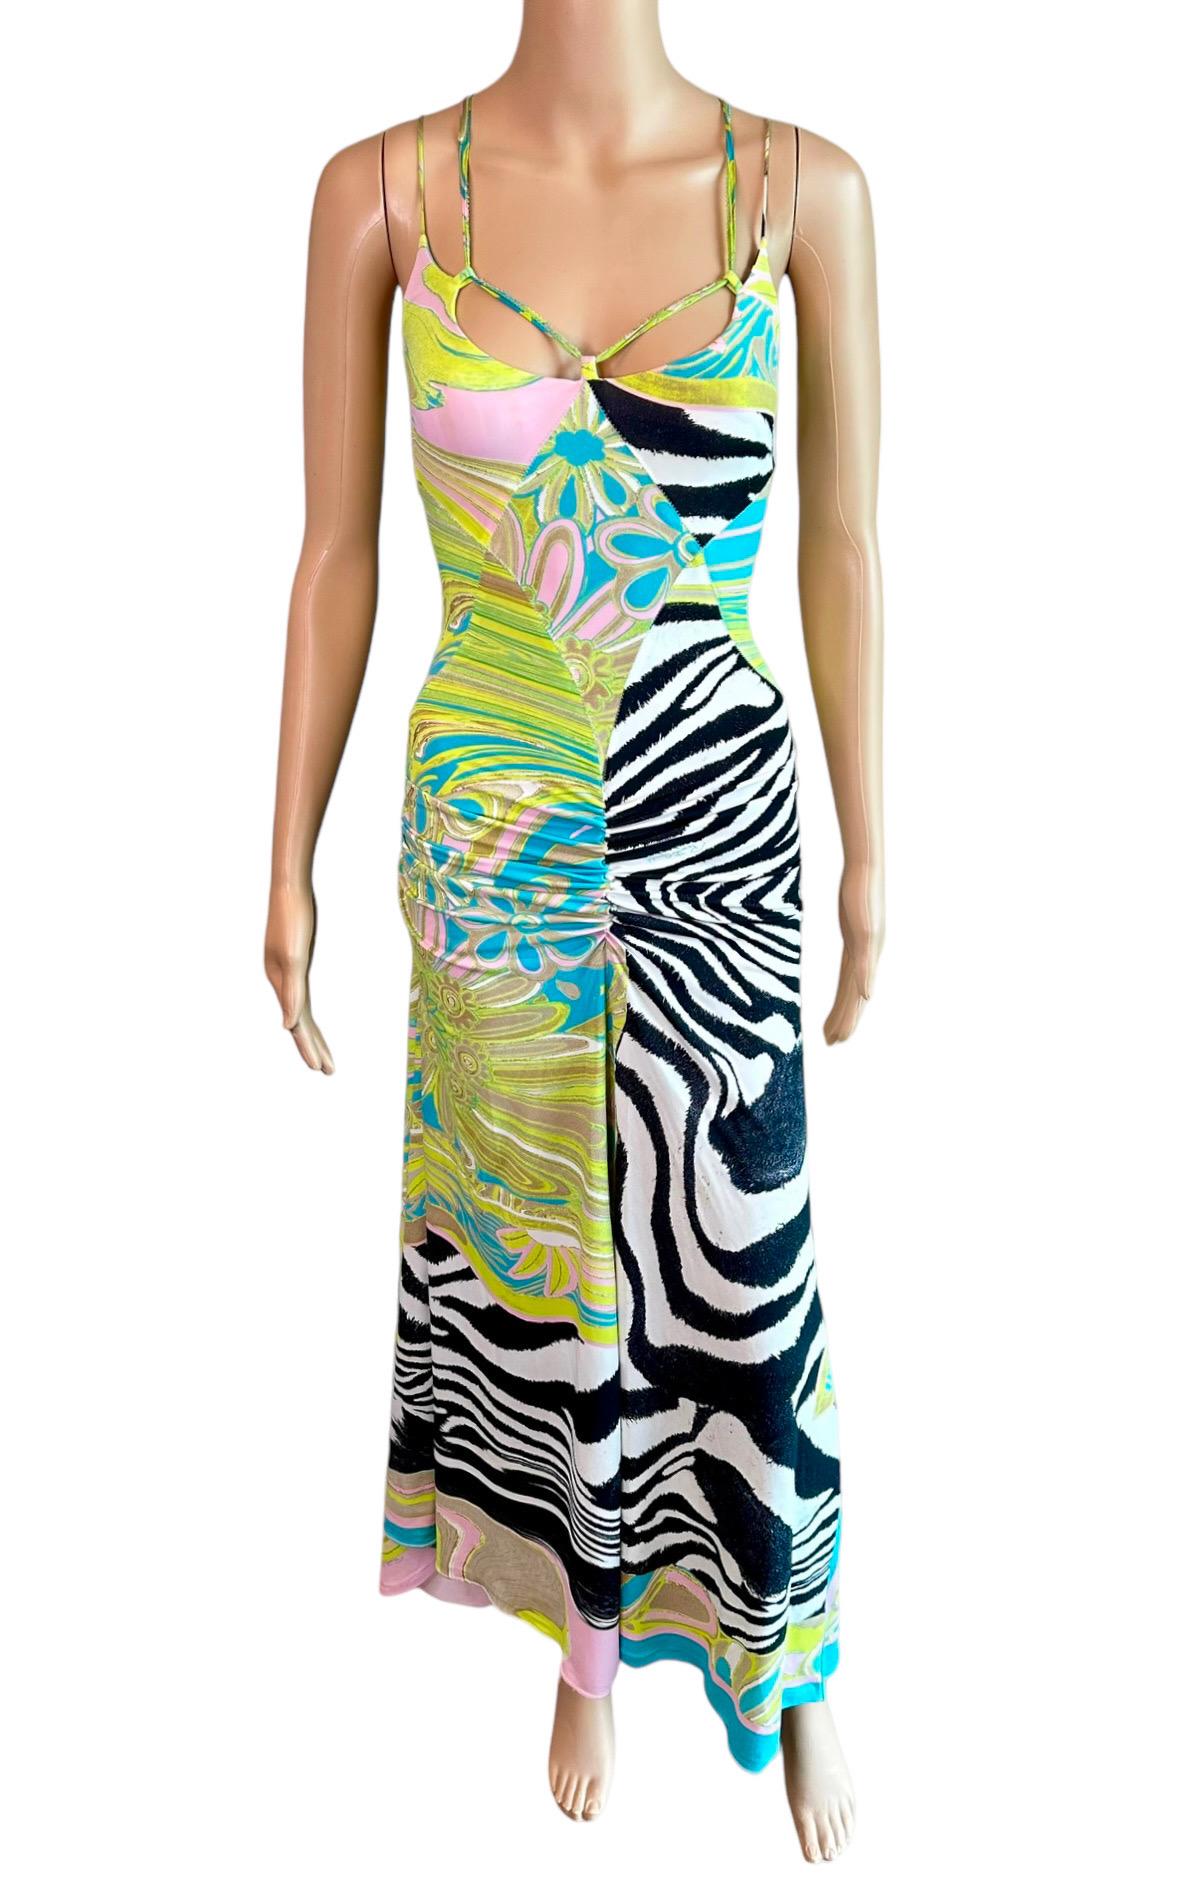 Women's Roberto Cavalli S/S 2004 Cutout Lace Up Plunging Neckline Maxi Evening Dress For Sale